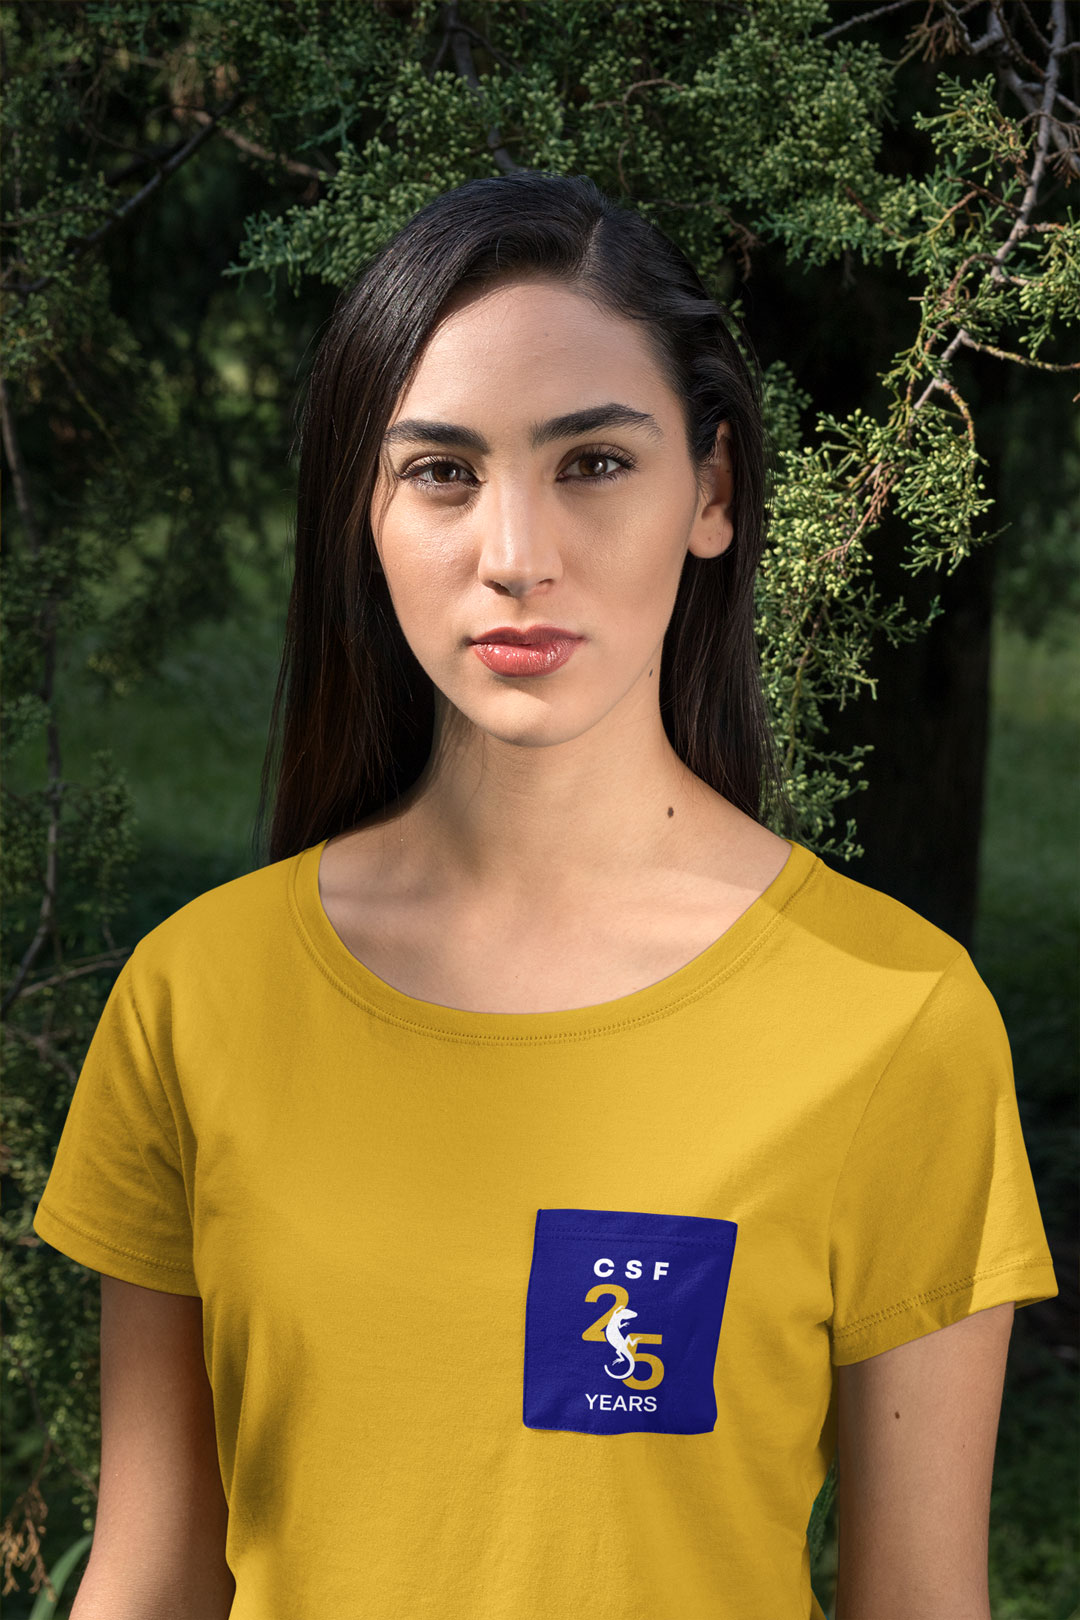 pocket-tee-mockup-featuring-a-serious-looking-woman-30076